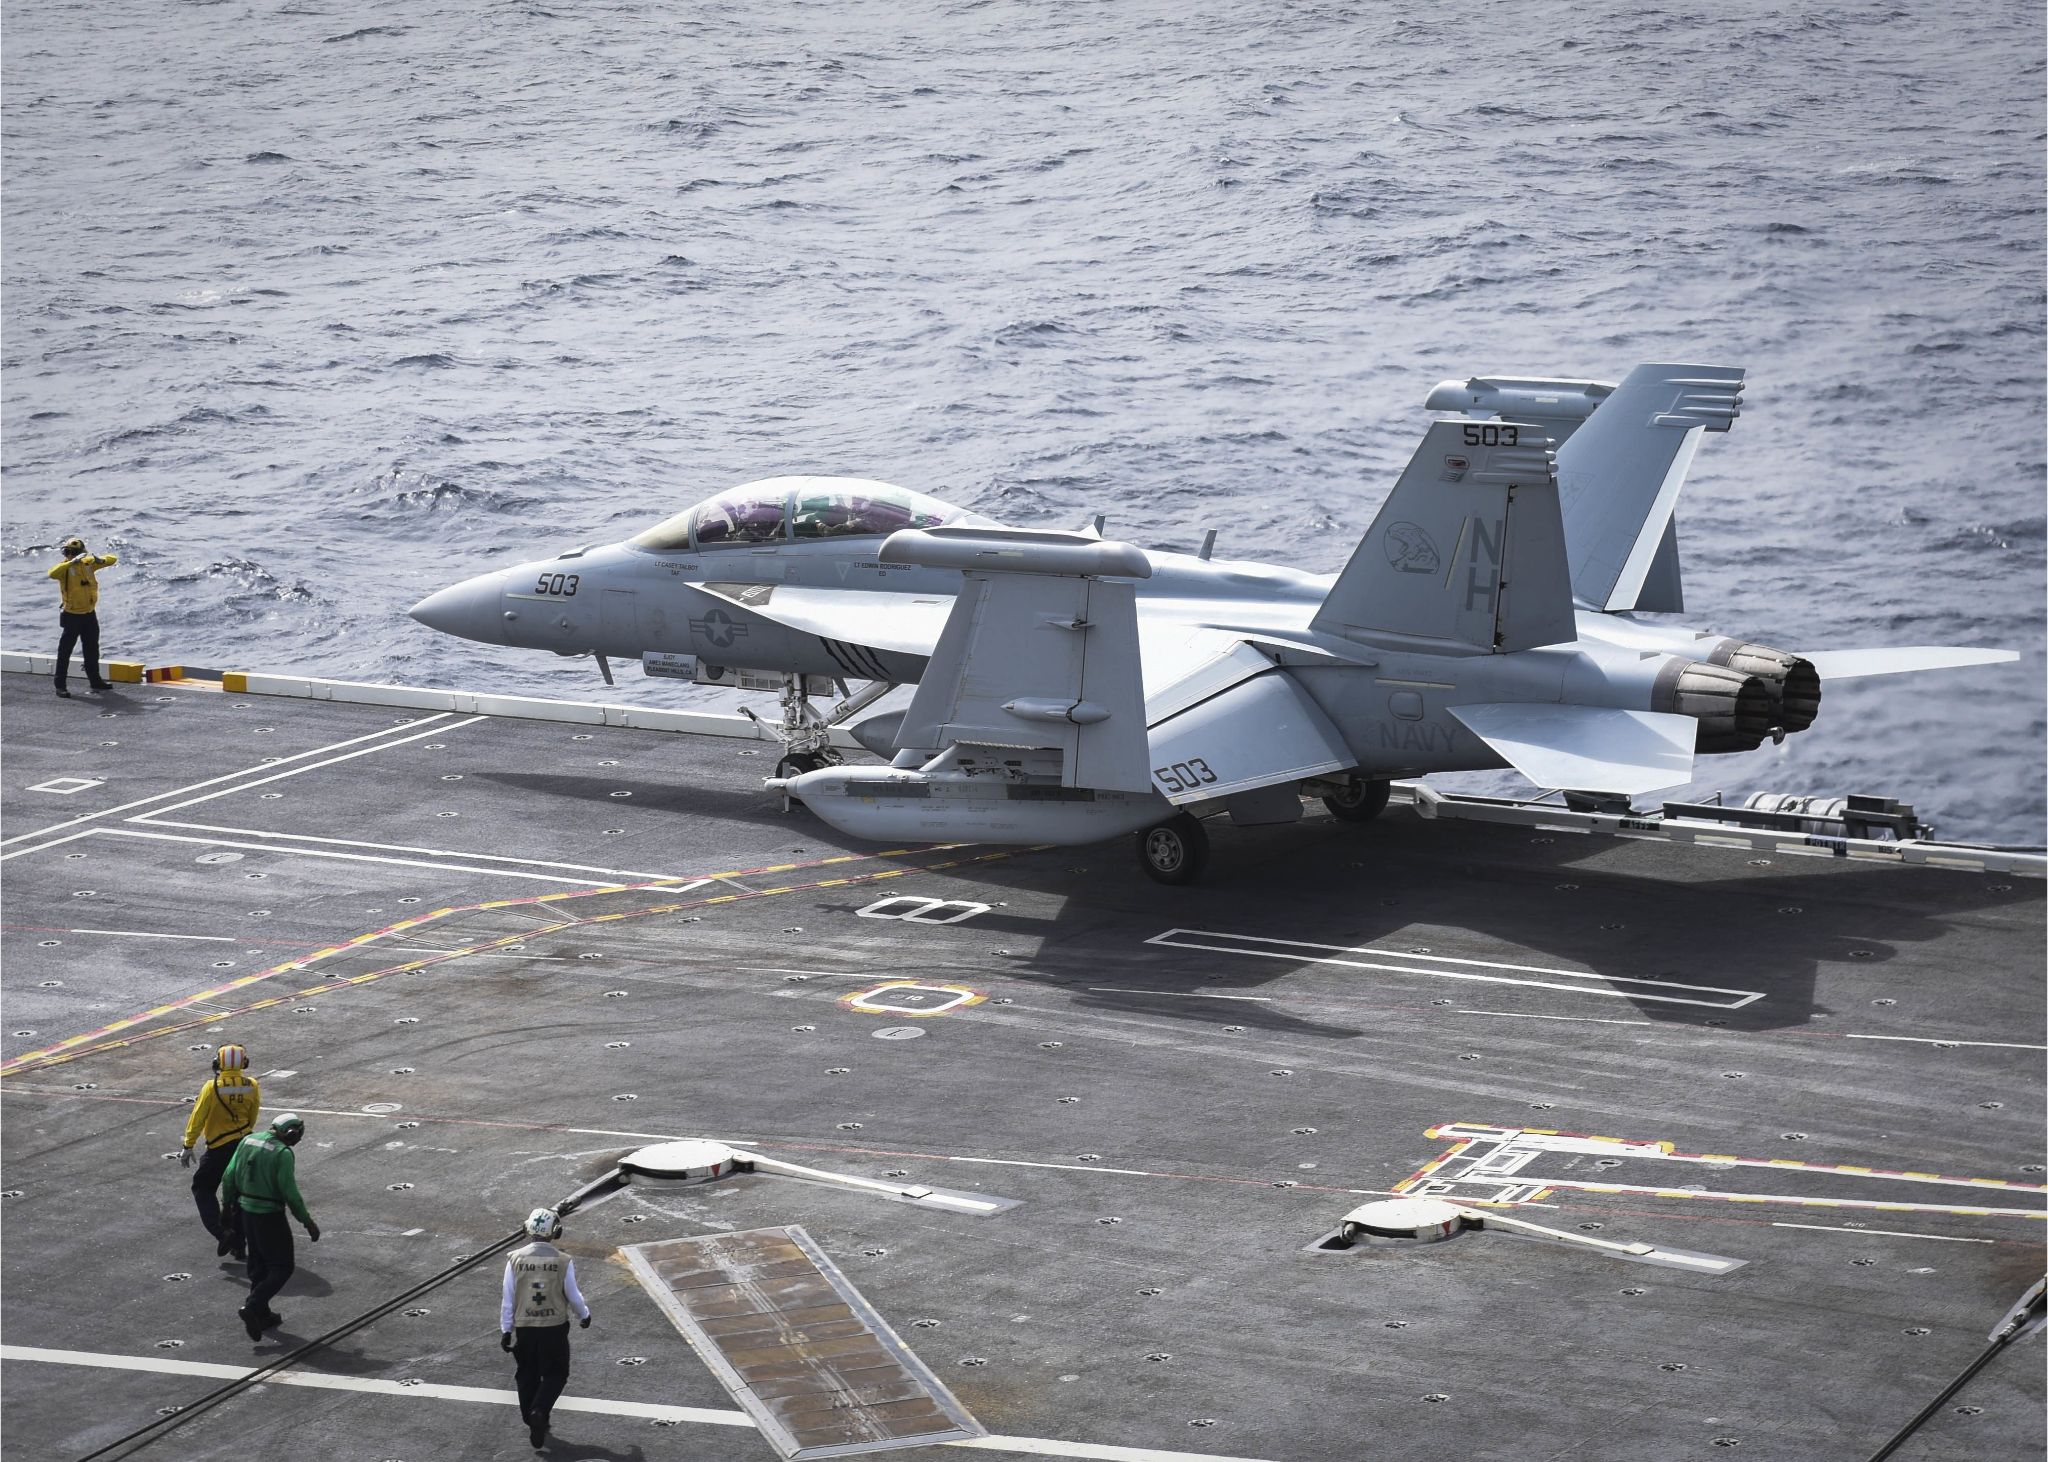 As part of the US Navy’s EA-18G Growler modernization, L3 Harris introduced its new NGJ-LB jamming pods.